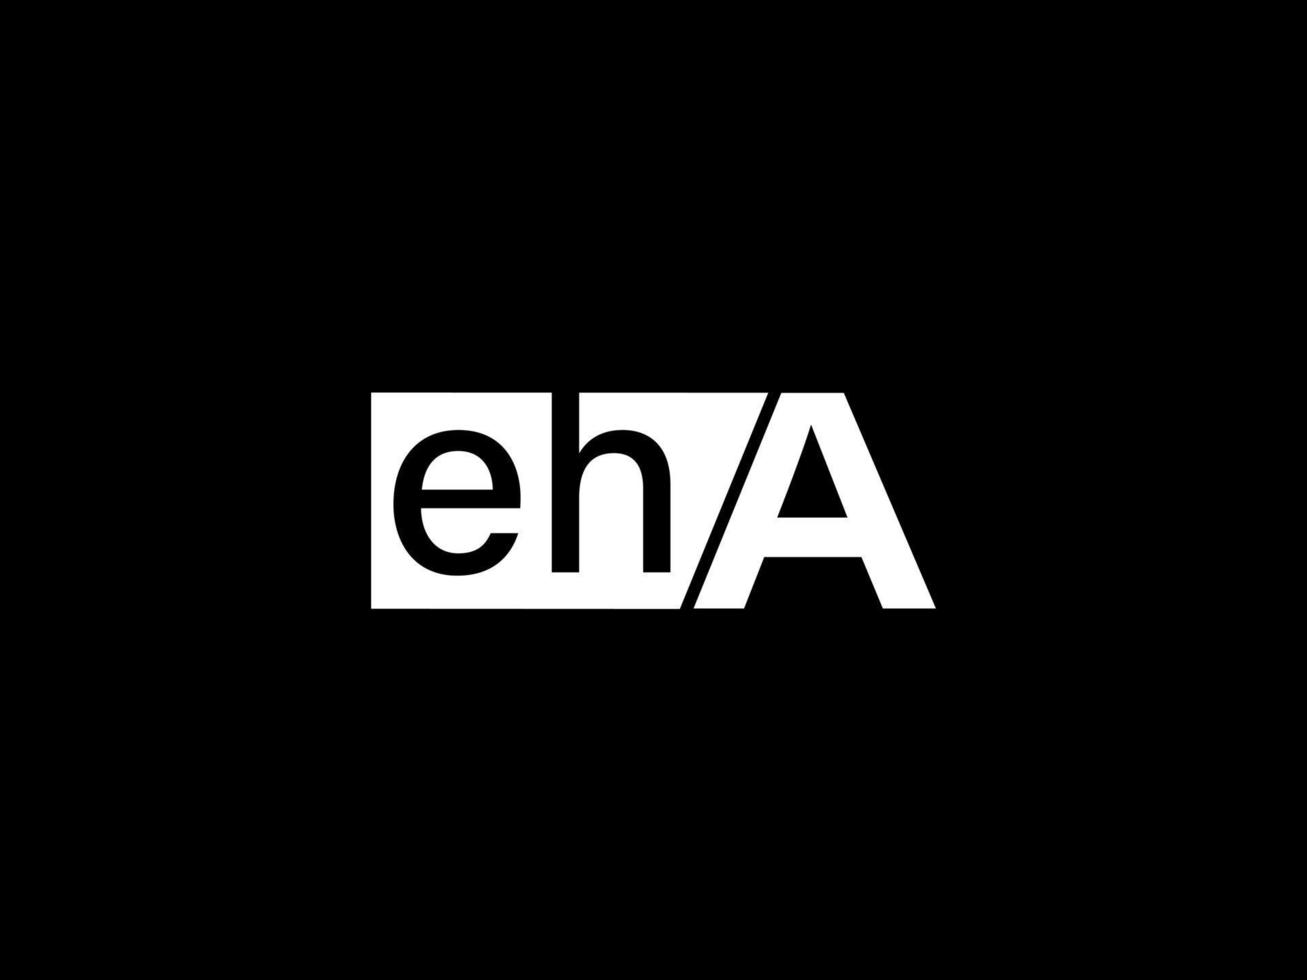 EHA Logo and Graphics design vector art, Icons isolated on black background